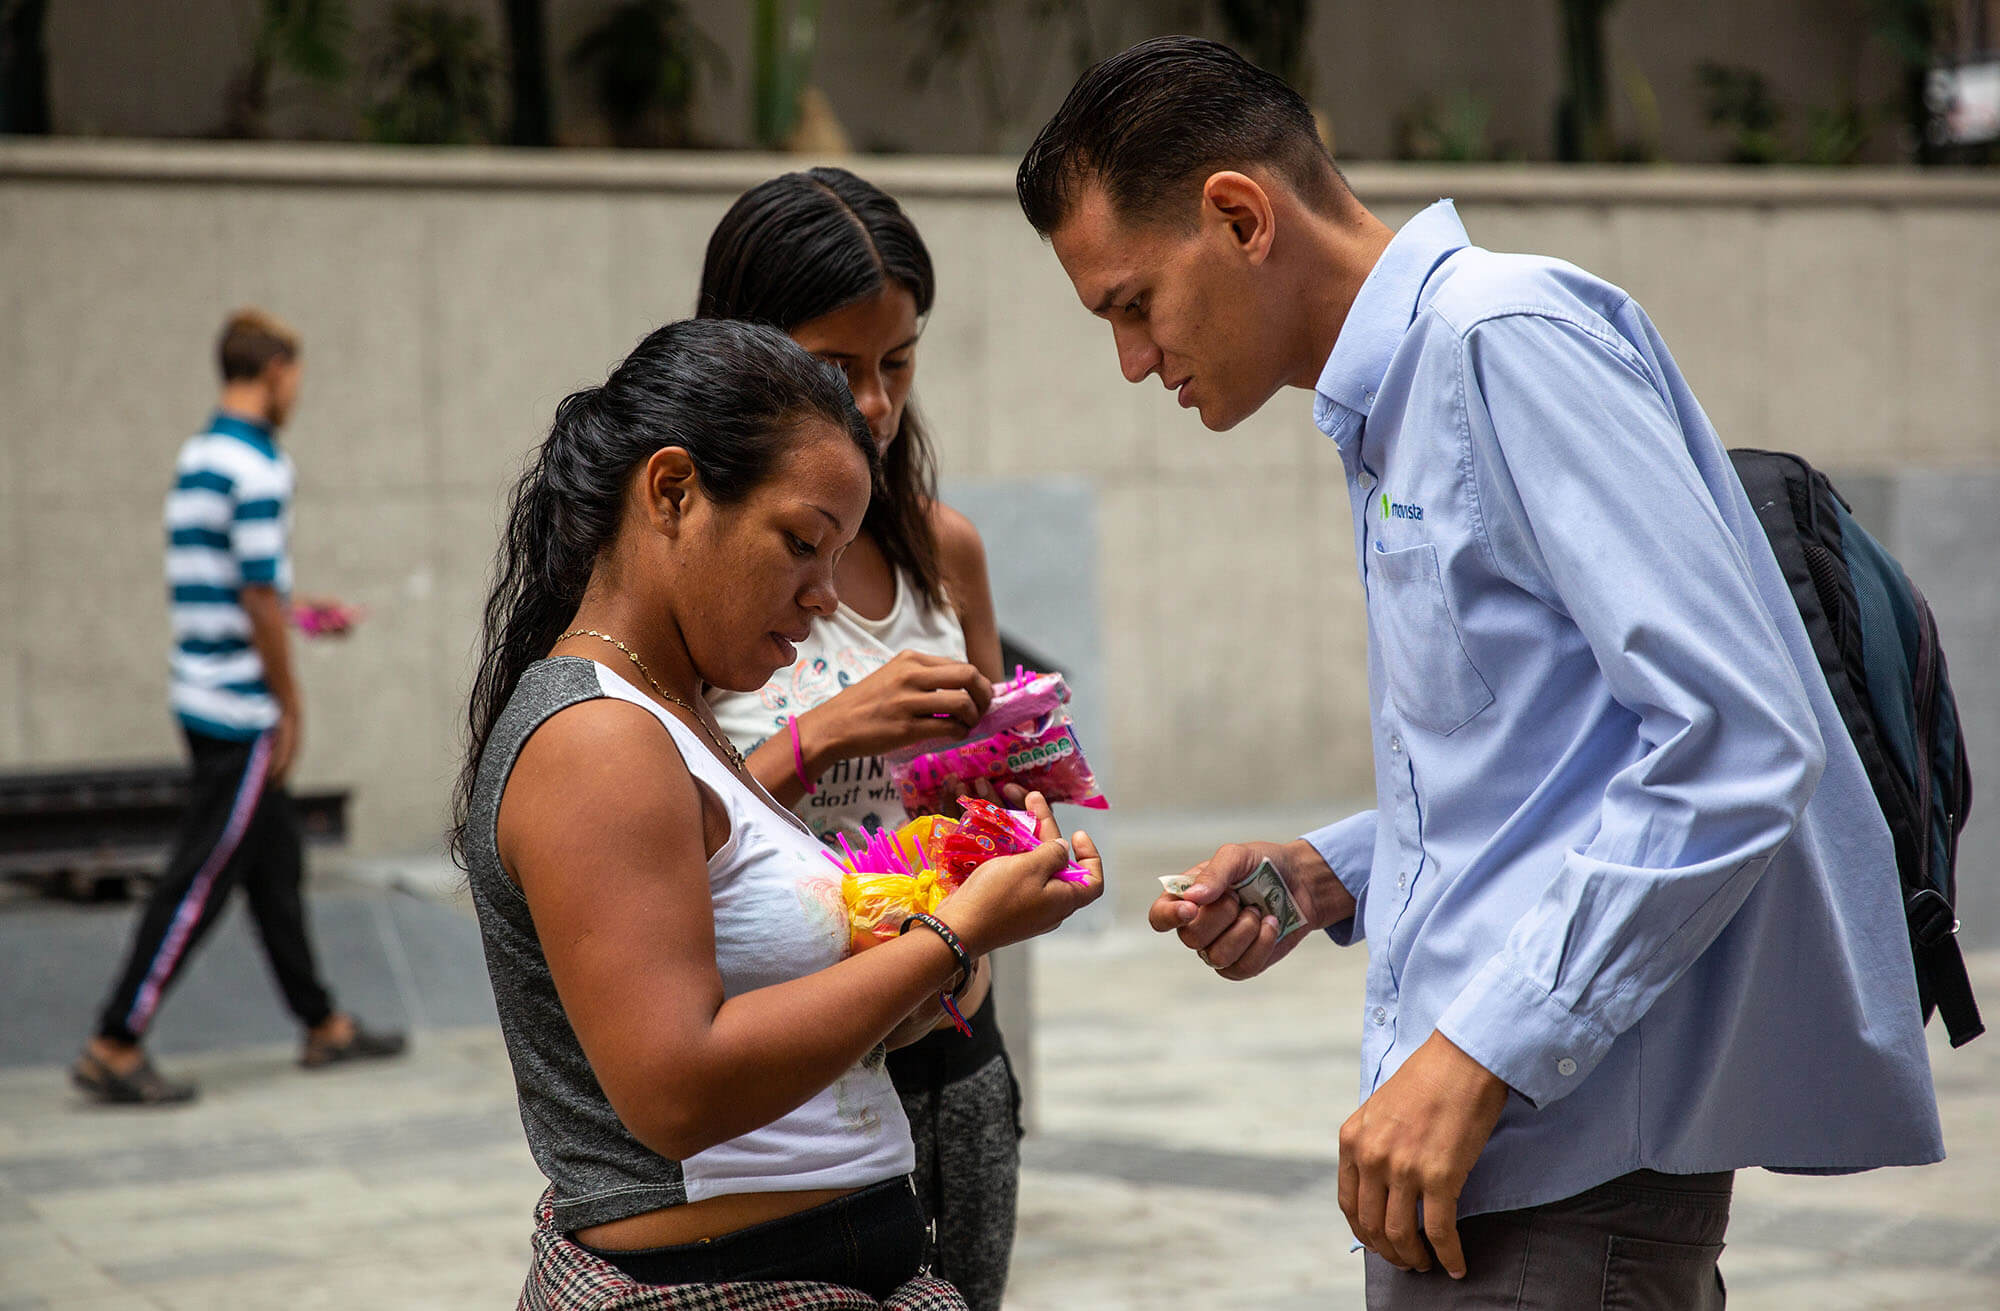 Two women show a man small candy they are giving out while he grips money